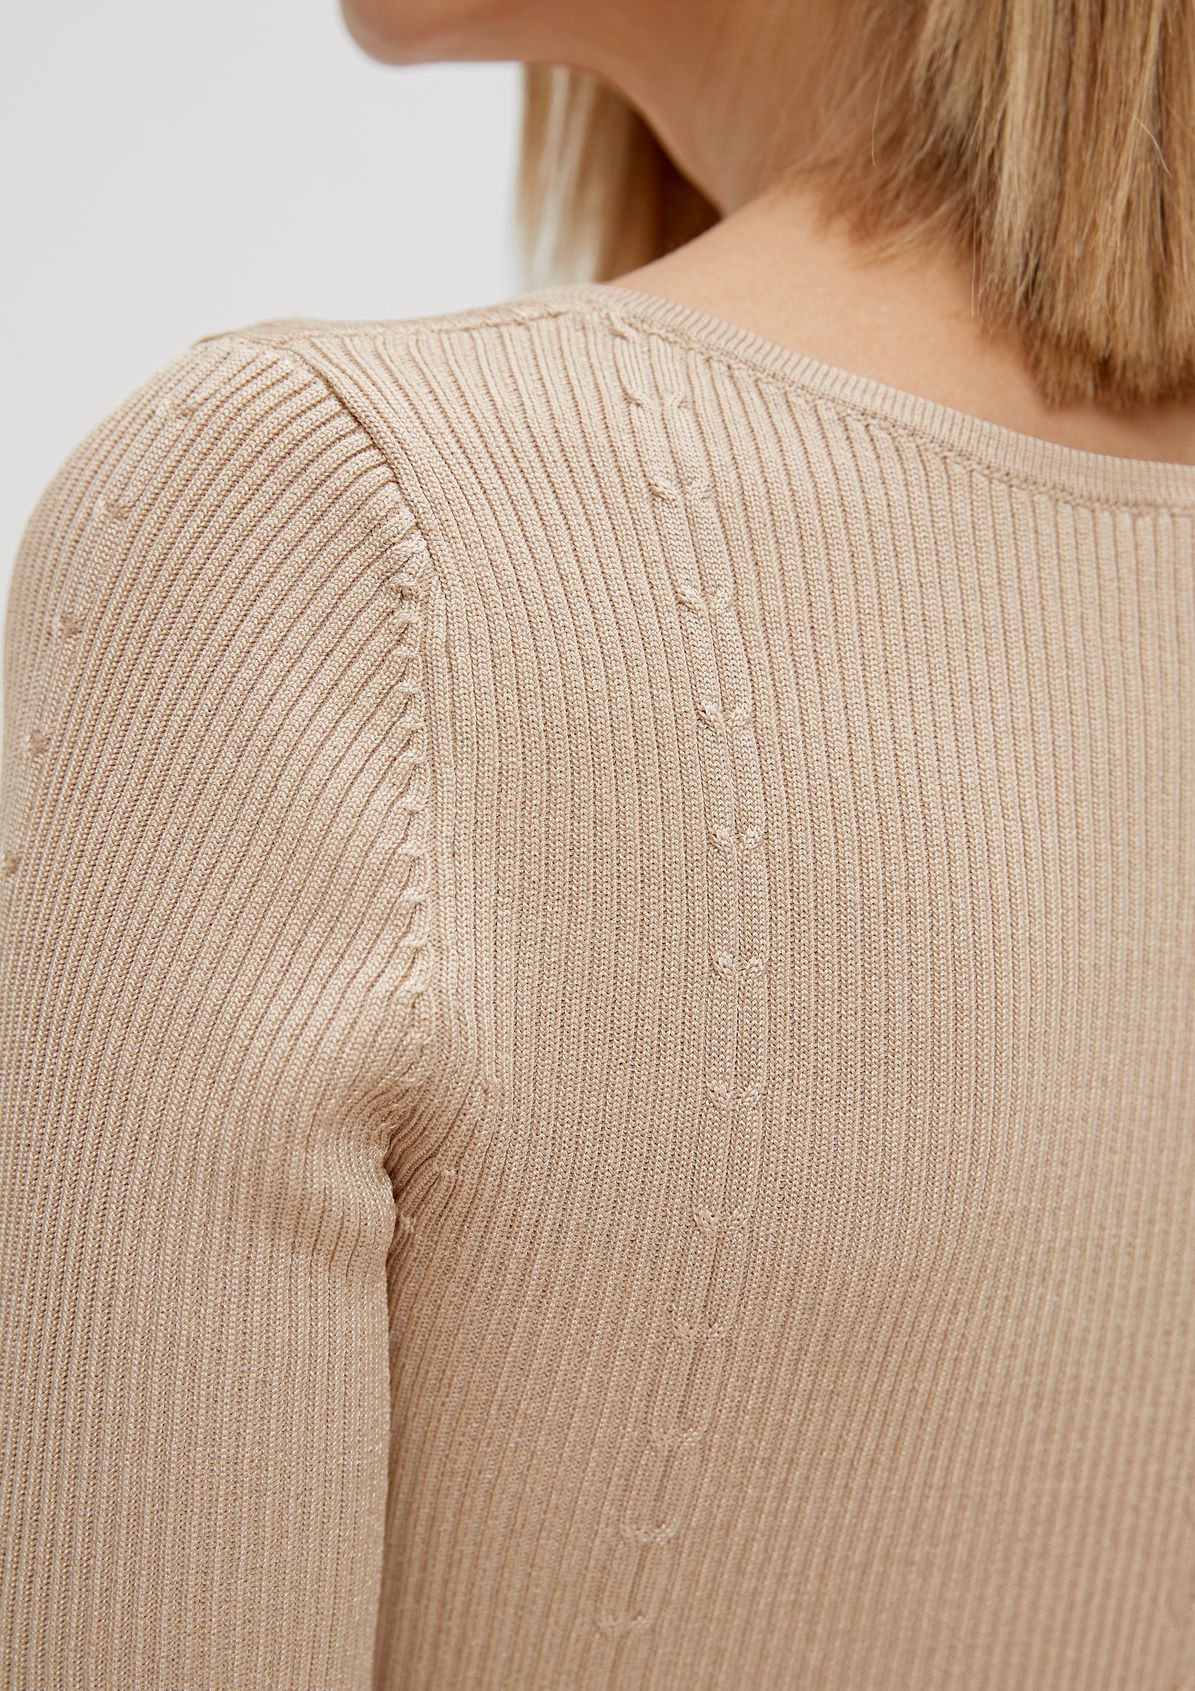 Fine knit top with a cable pattern from comma